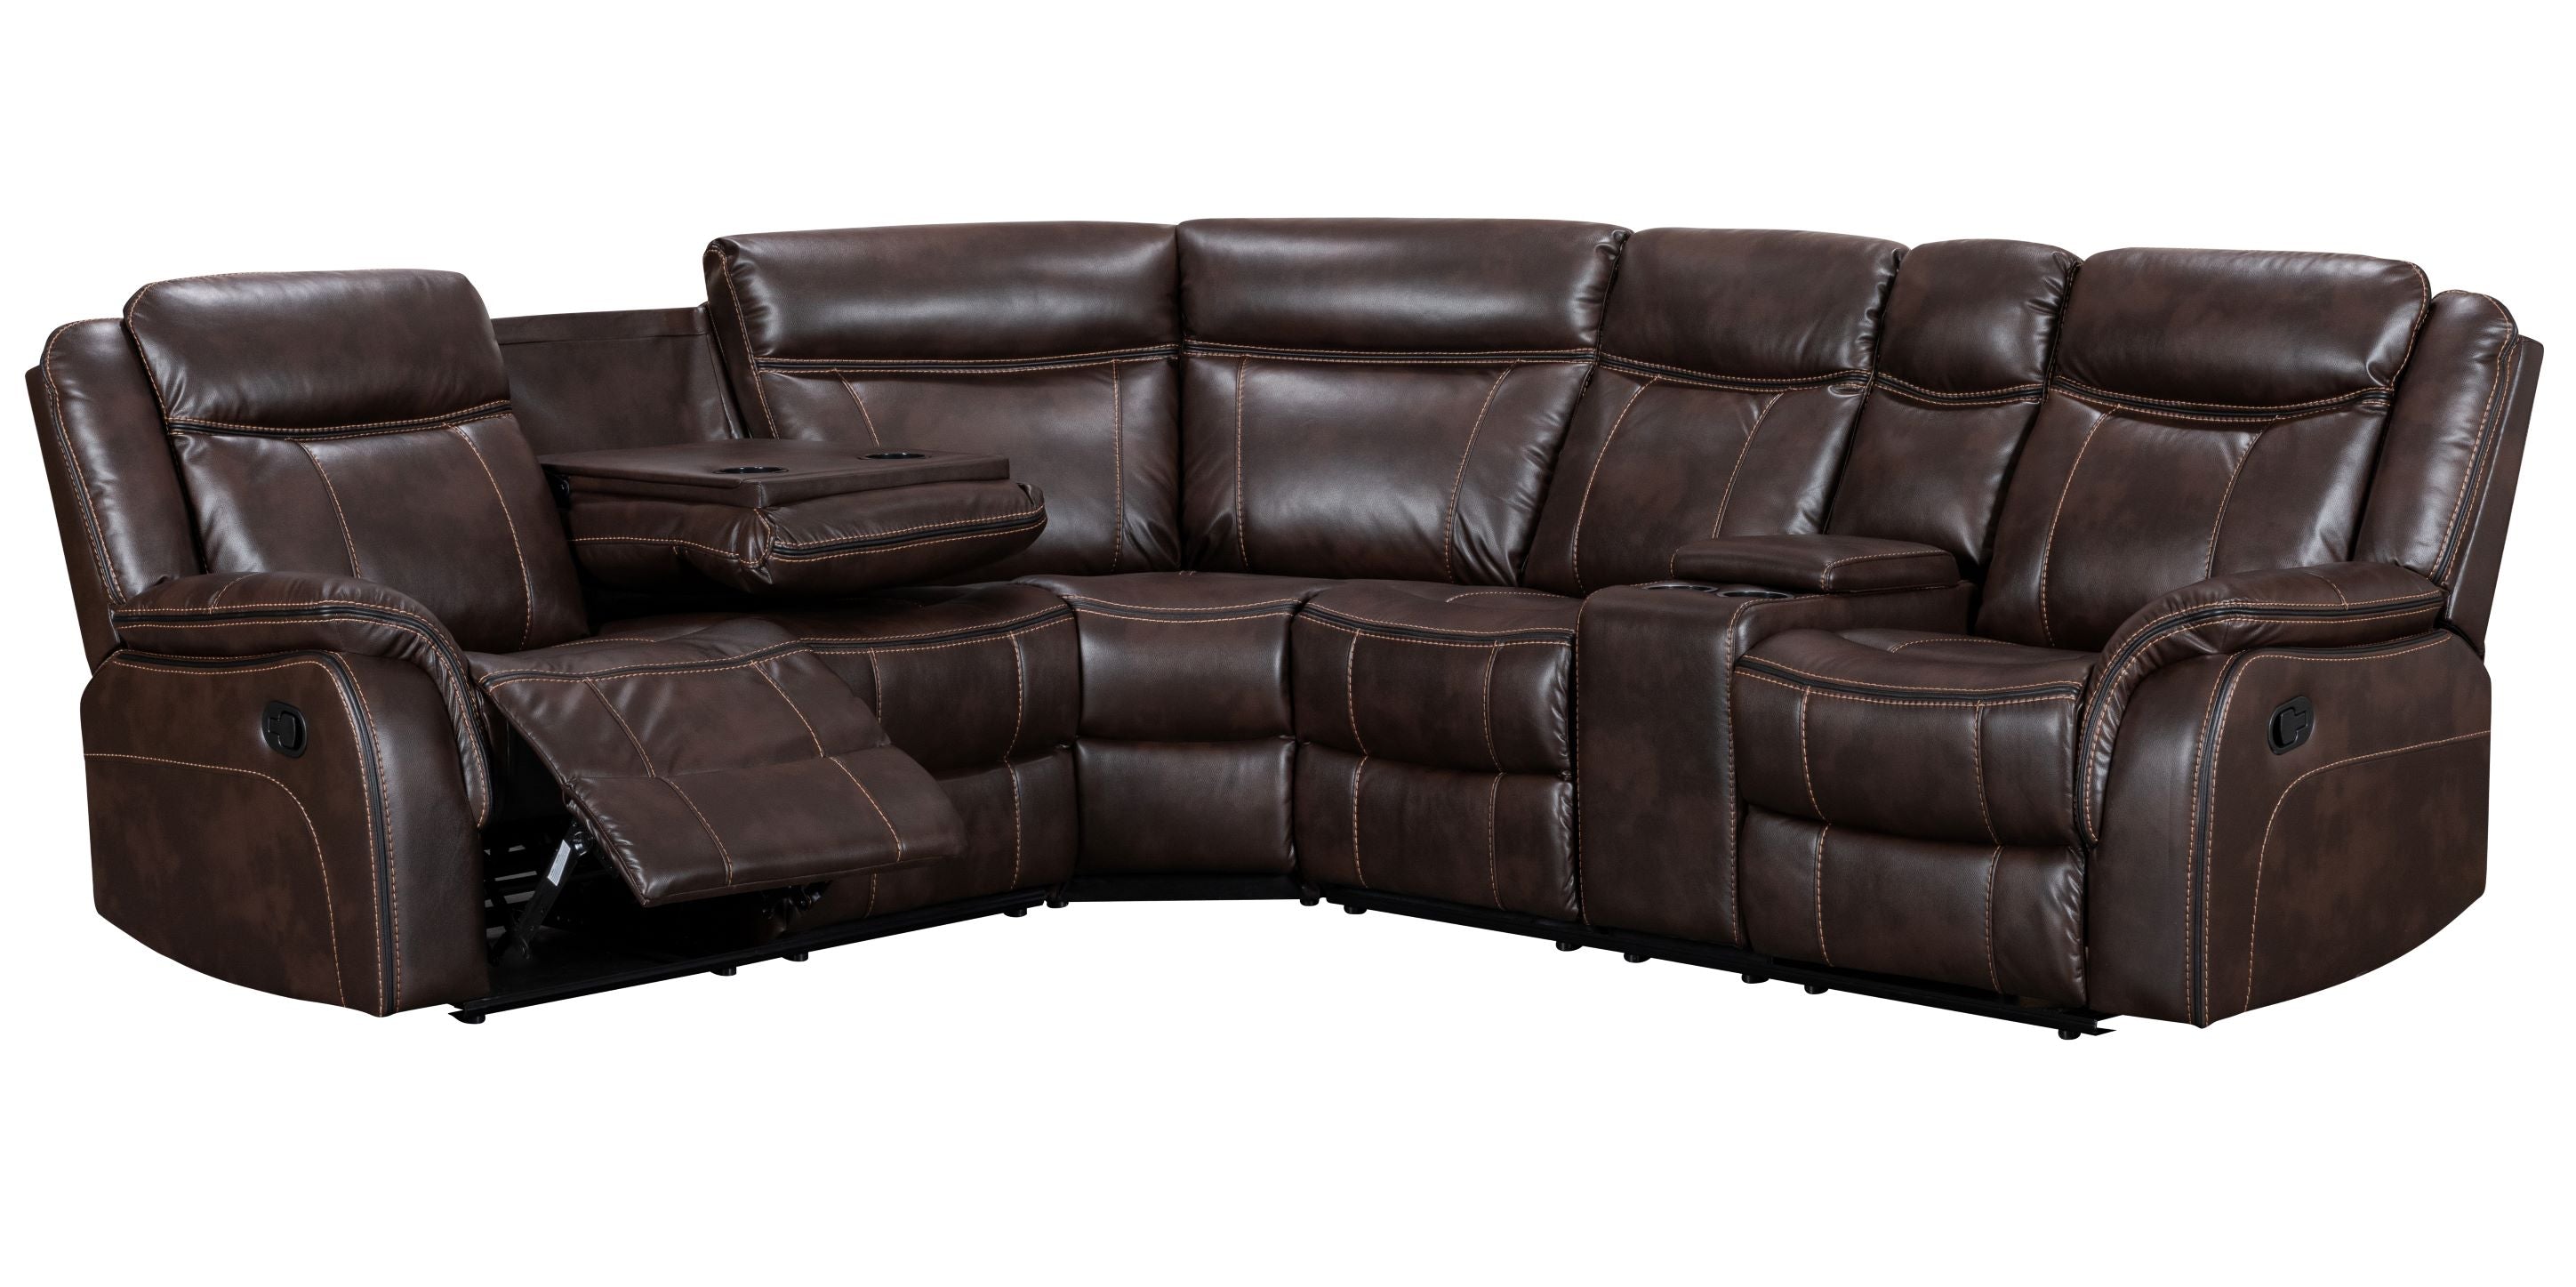 Neoma Manual Recliner Sectional Sofa Brown Gel Leather 70220